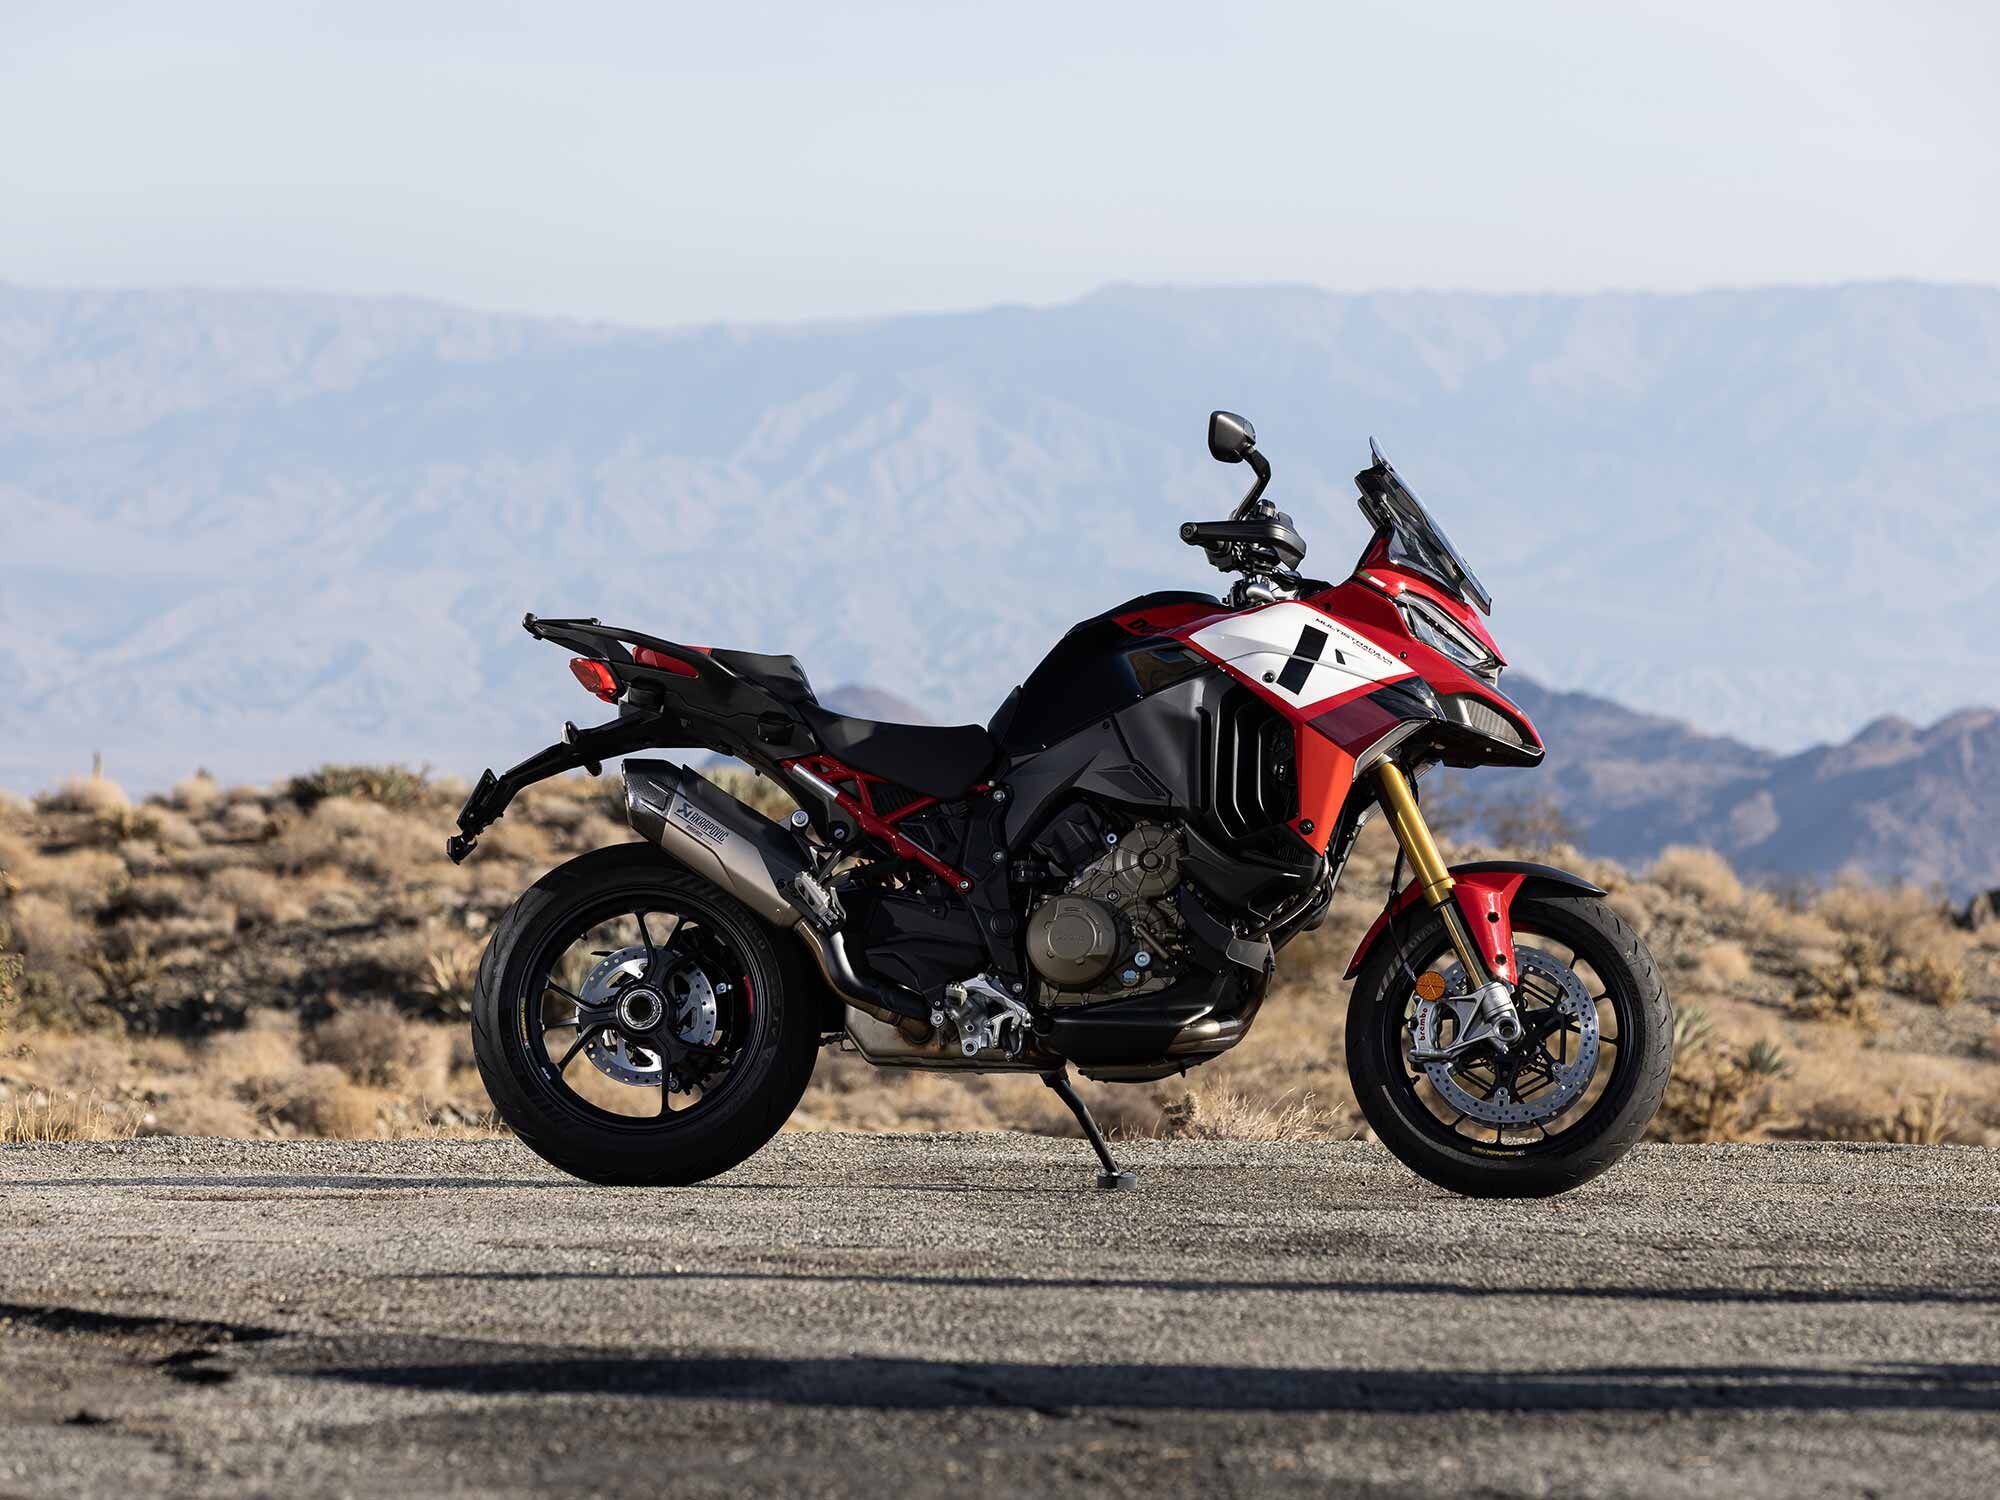 Although the race is no longer open to motorcycles, Ducati continues to offer a road-specific Pikes Peak variation with its Multistrada V4.